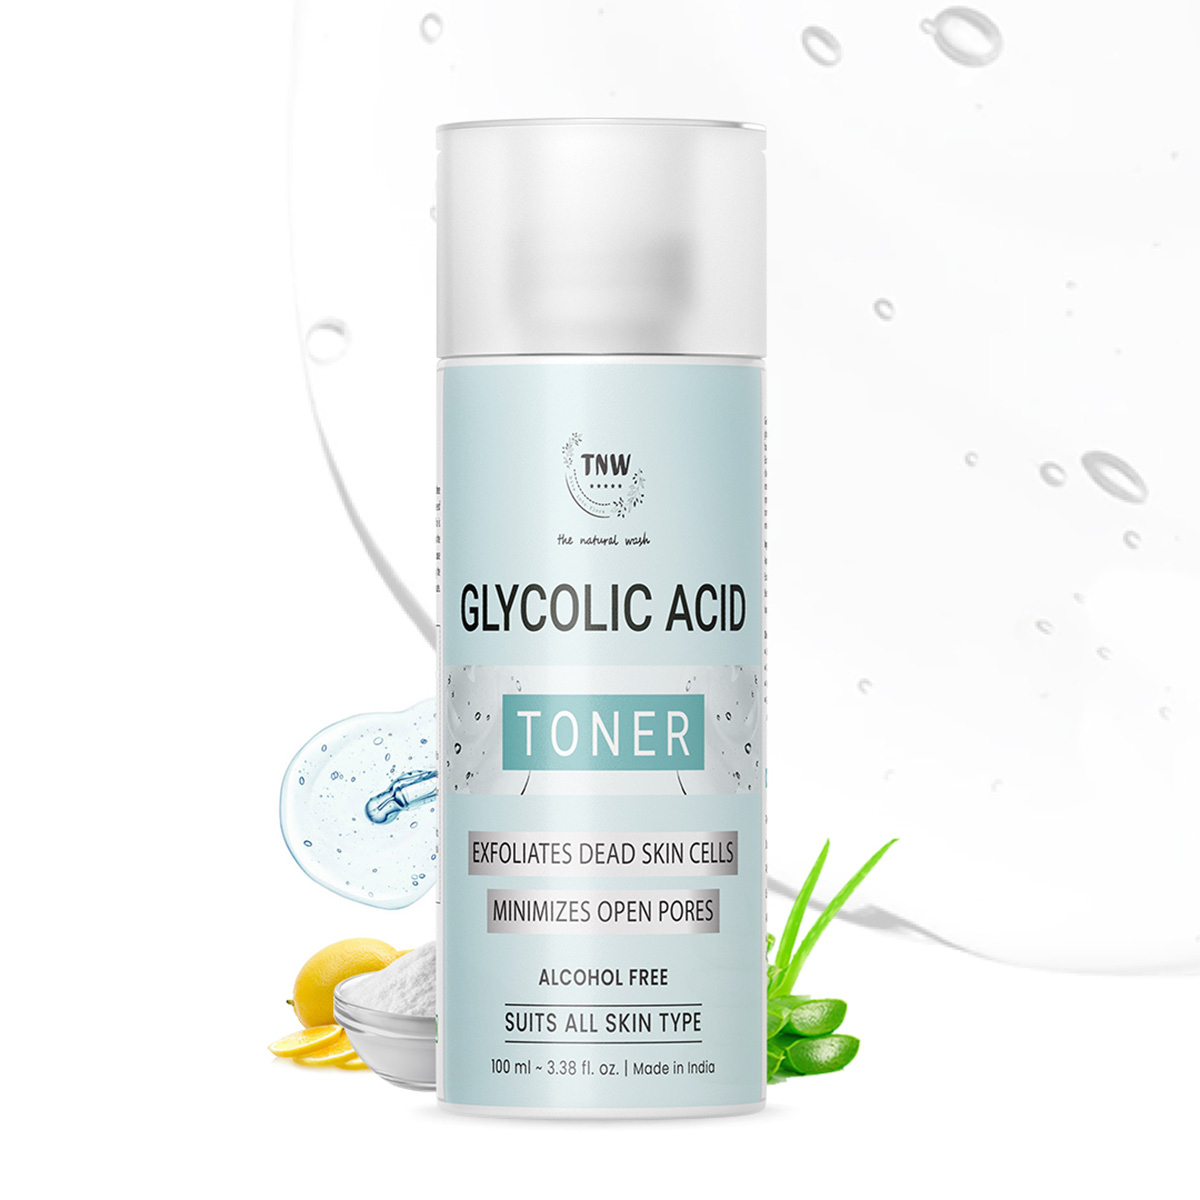 TNW - The Natural Wash Glycolic Acid Toner For Exfoliating Dead Skin Cells, 100ml